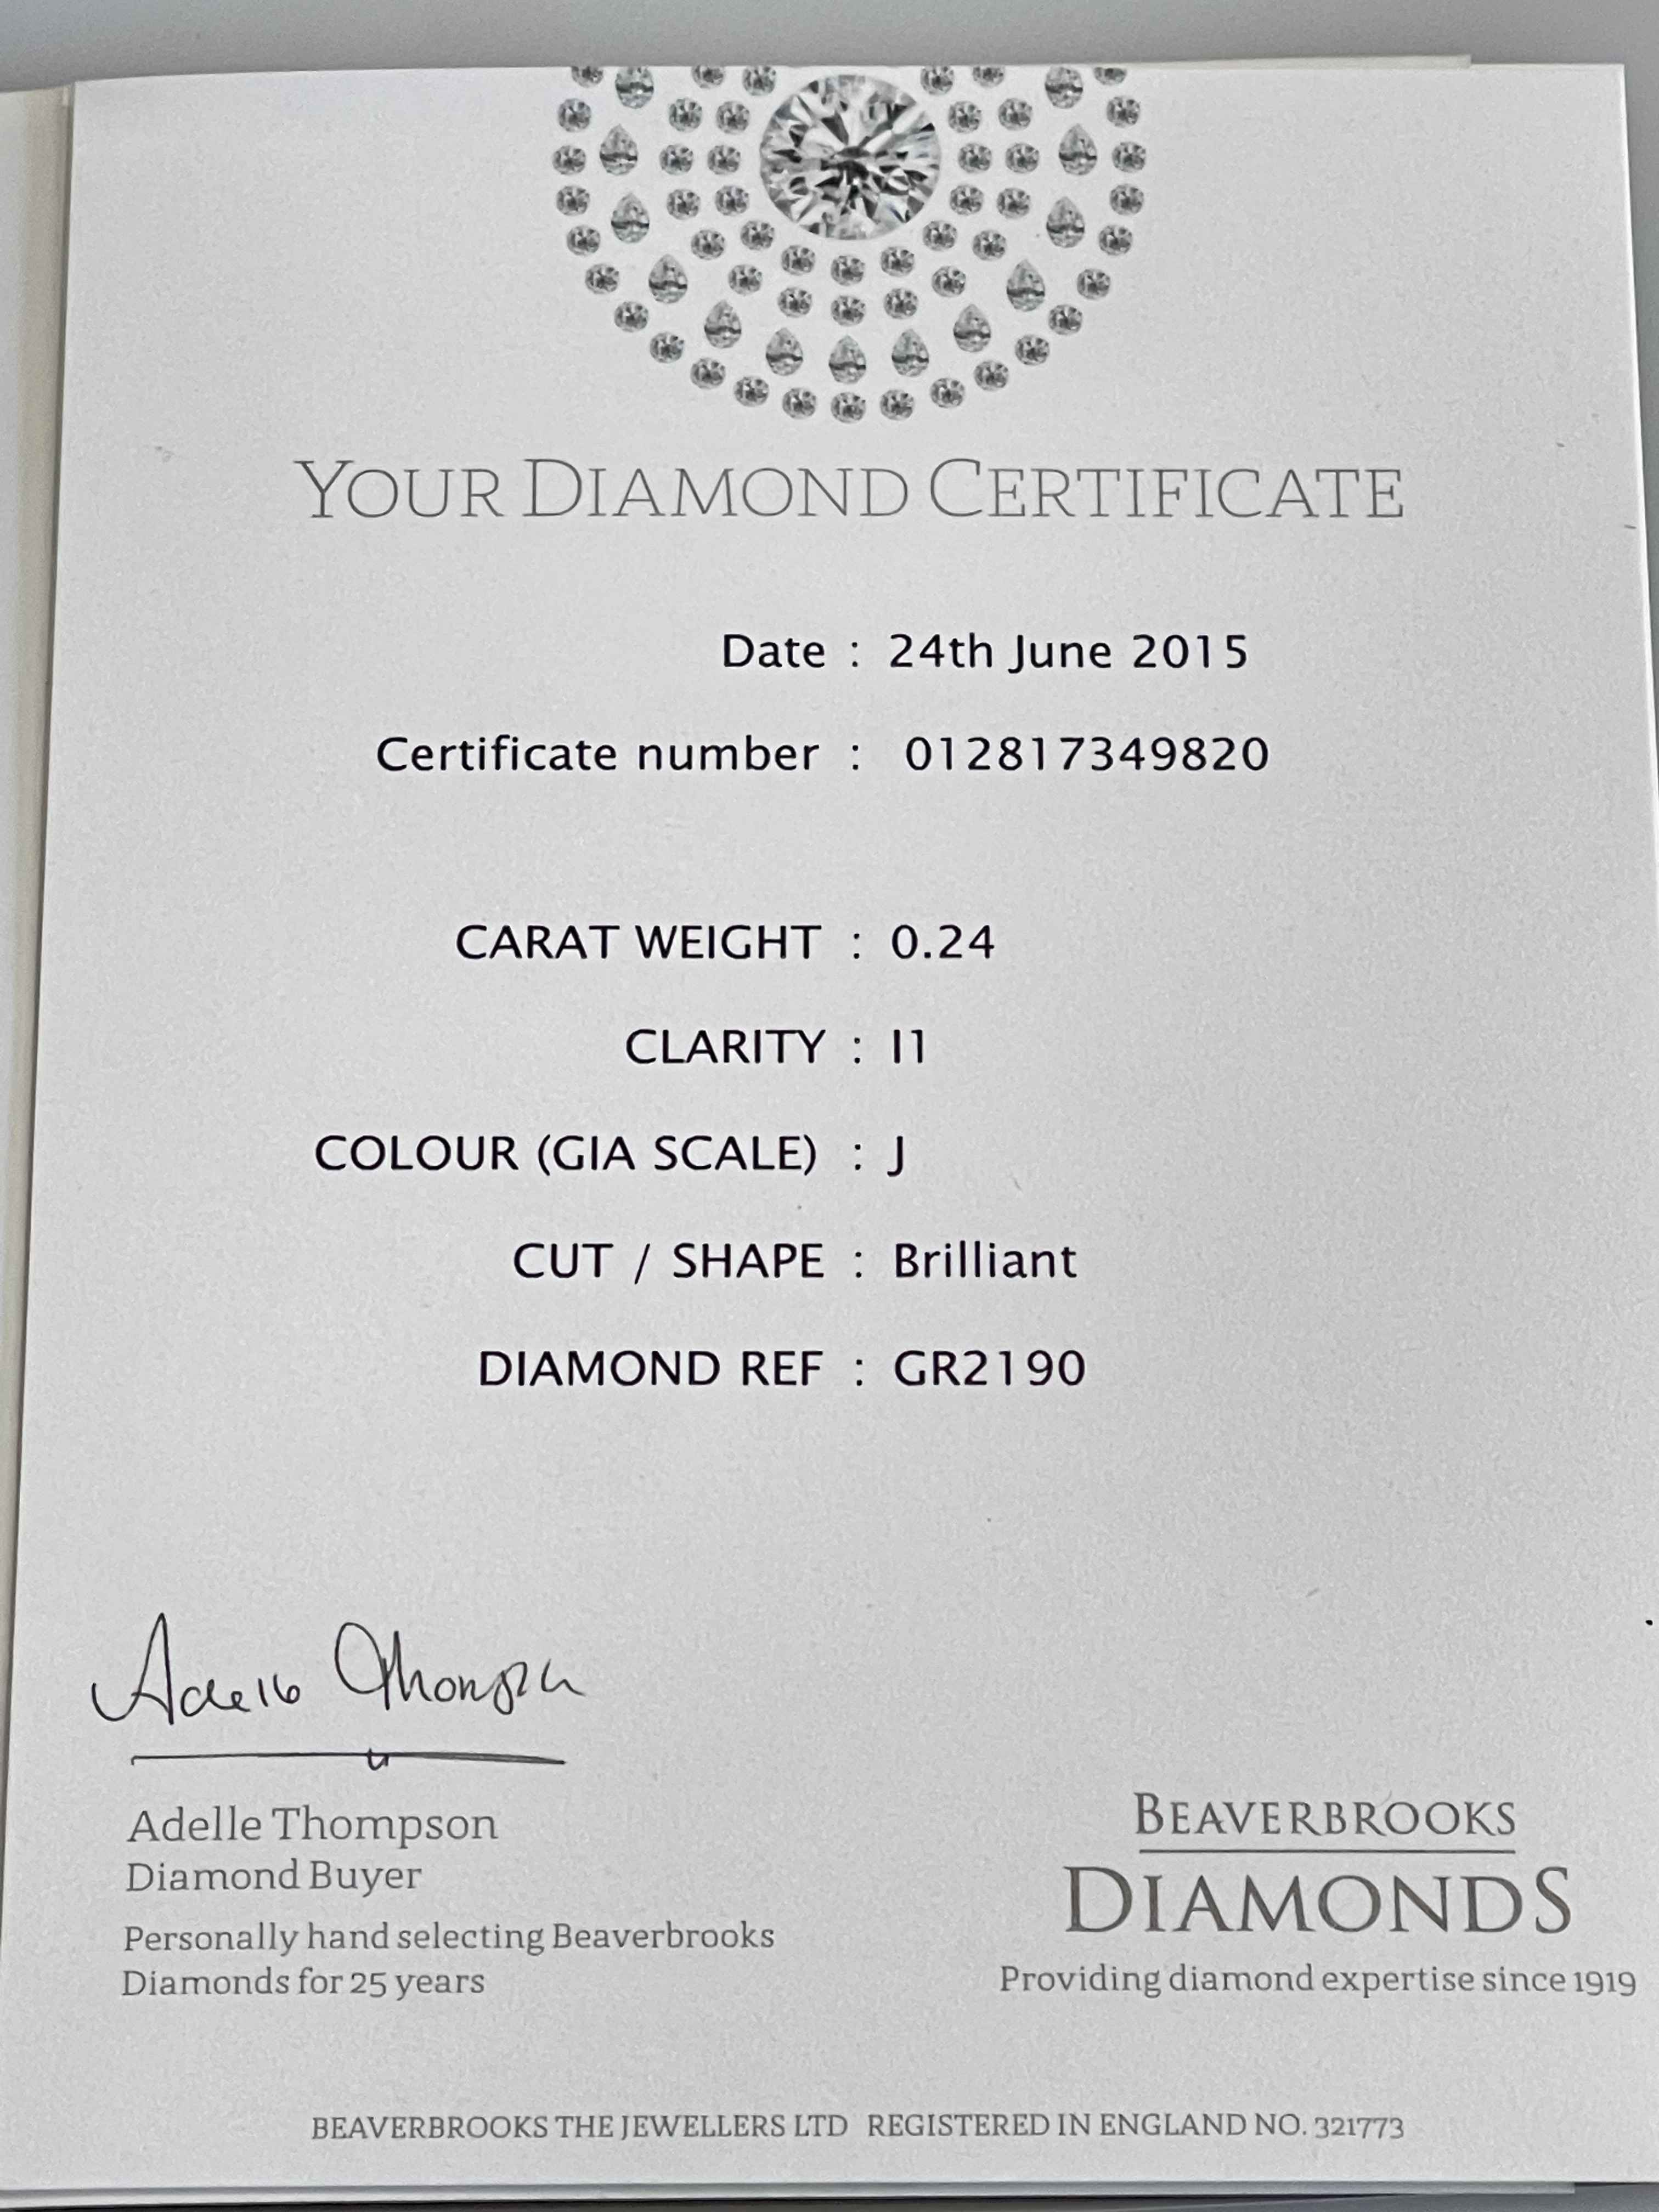 Diamond multi-stone 9 carat white gold ring, size K, in Beaverbrooks box with certificate. - Image 3 of 3